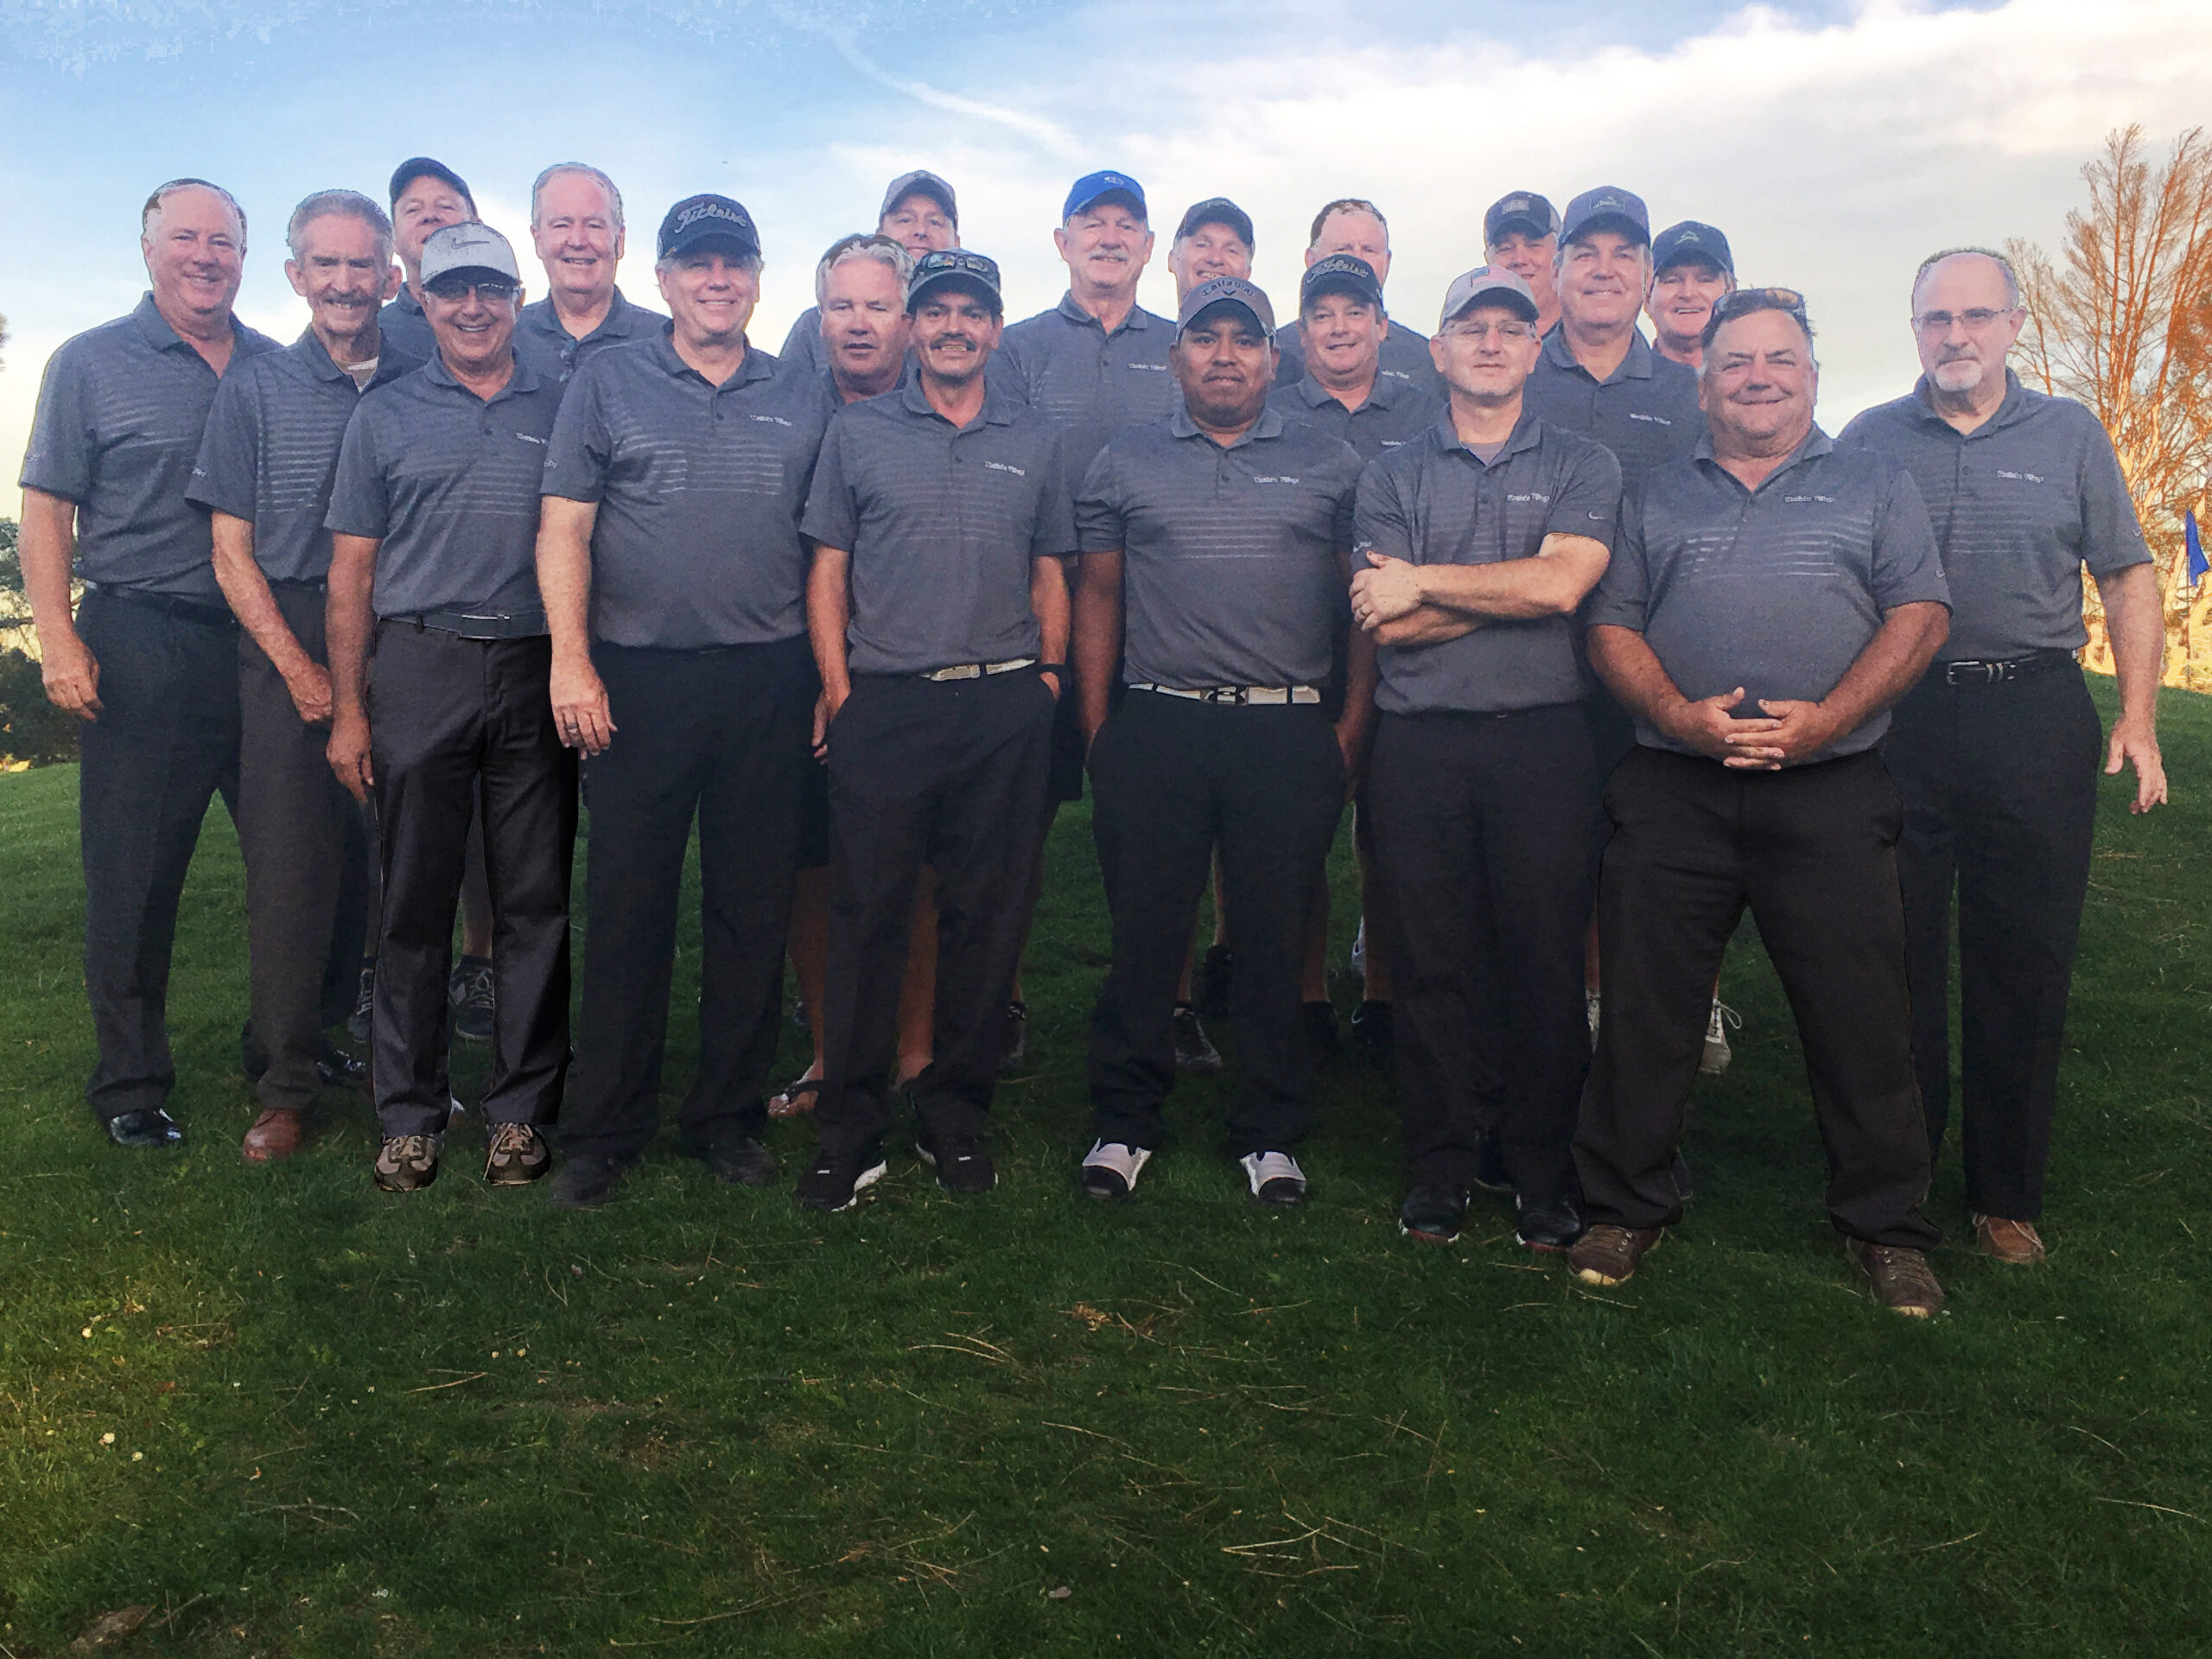 A Group Photo of the Members of the 2017 Men's Club at Westlake Golf Course